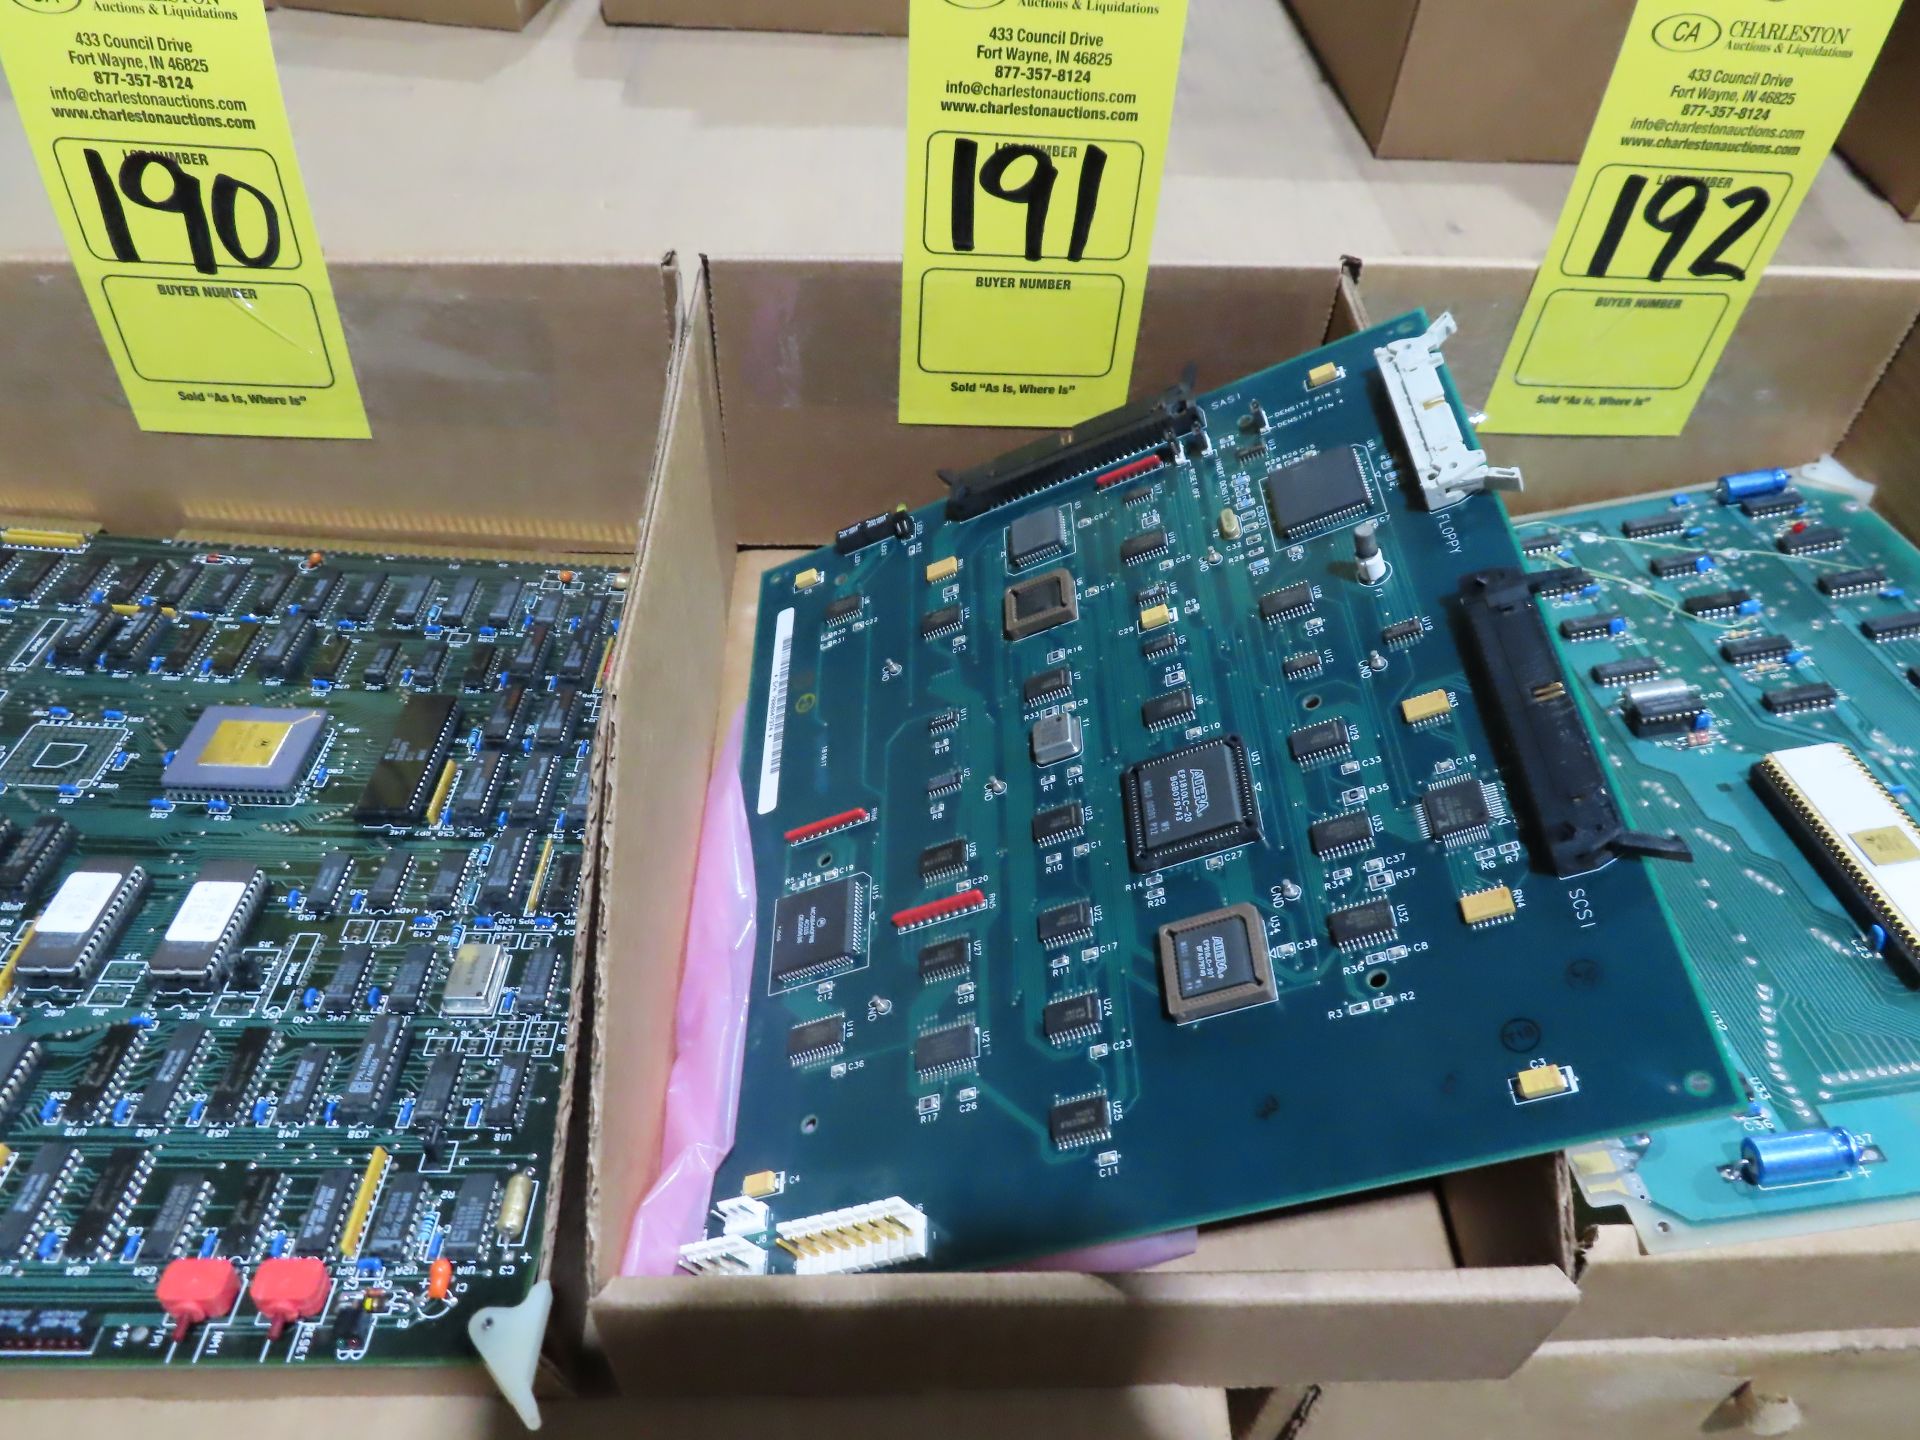 Adept part number 10300-46625 rev P7 mass storage control board, as always, with Brolyn LLC